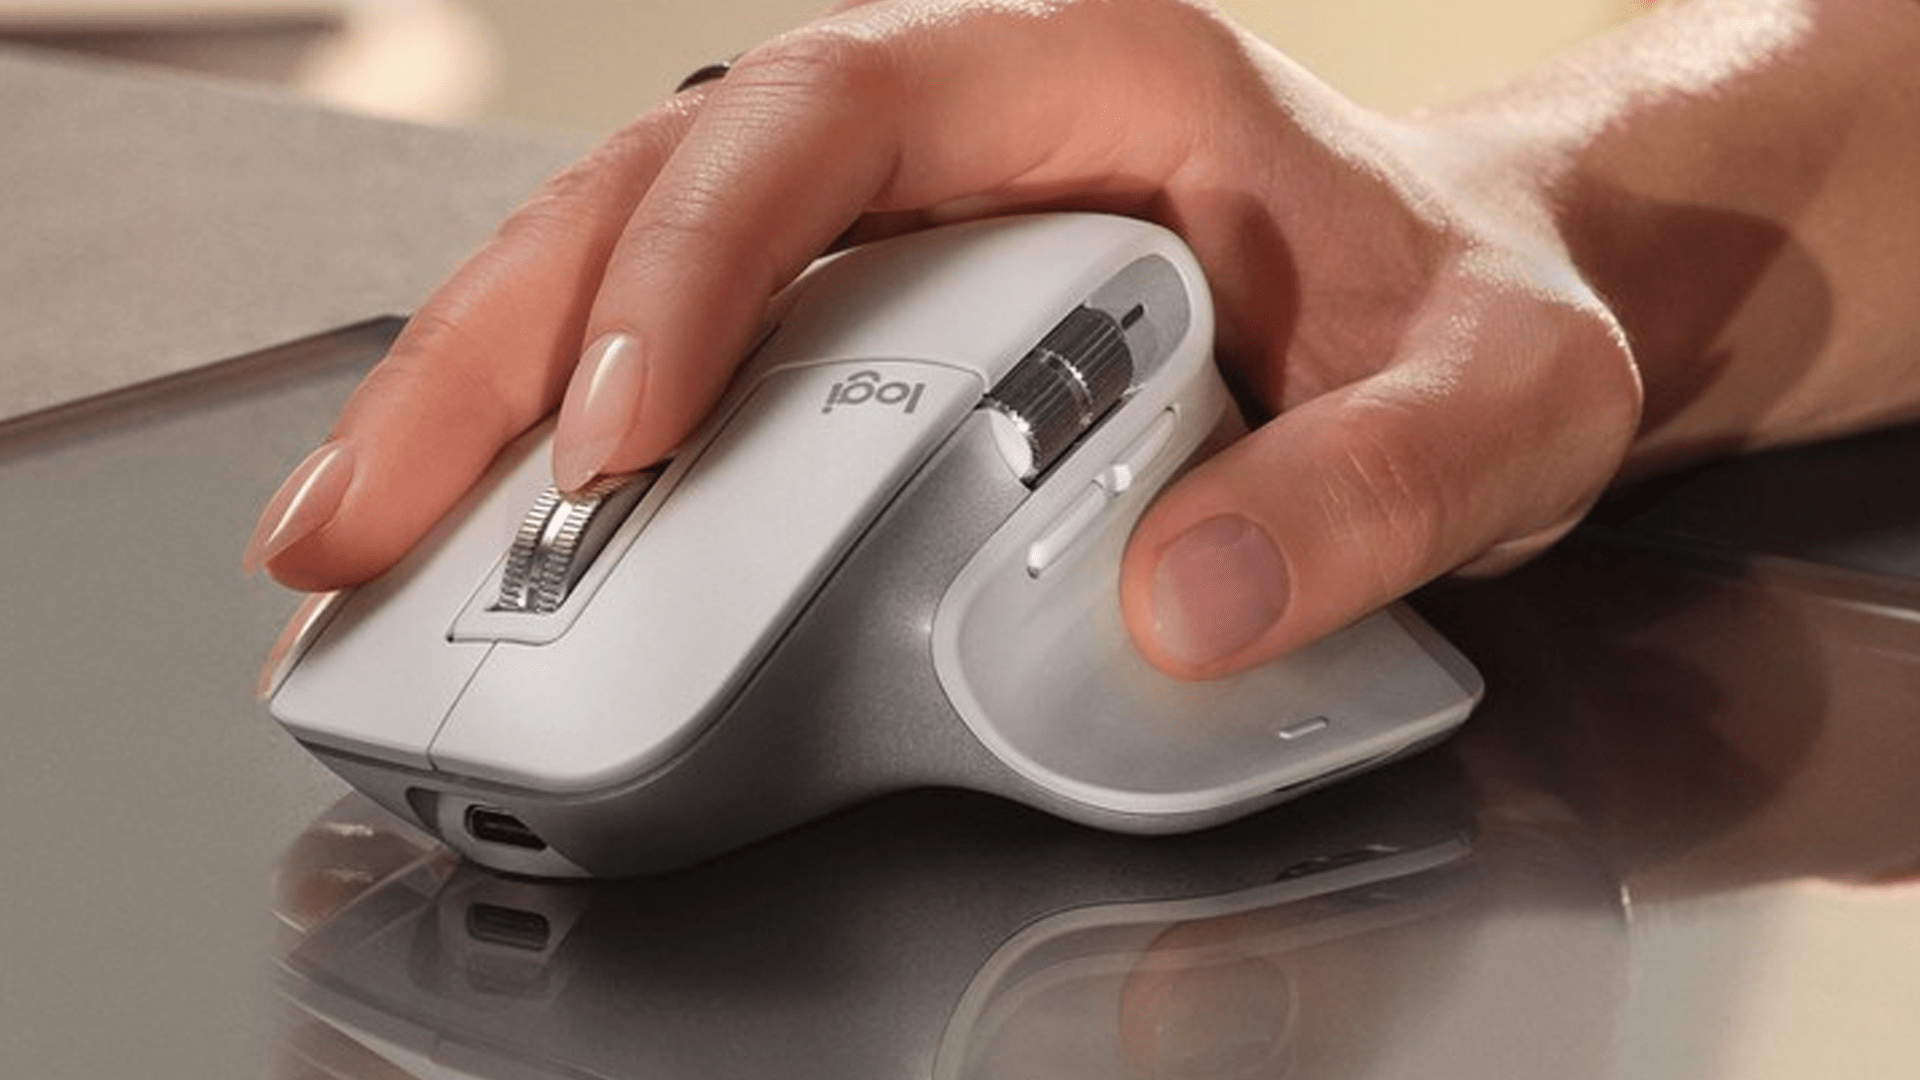 Logitech MX Master 3S: Upcoming wireless mouse leaks with important changes  and an increased asking price -  News